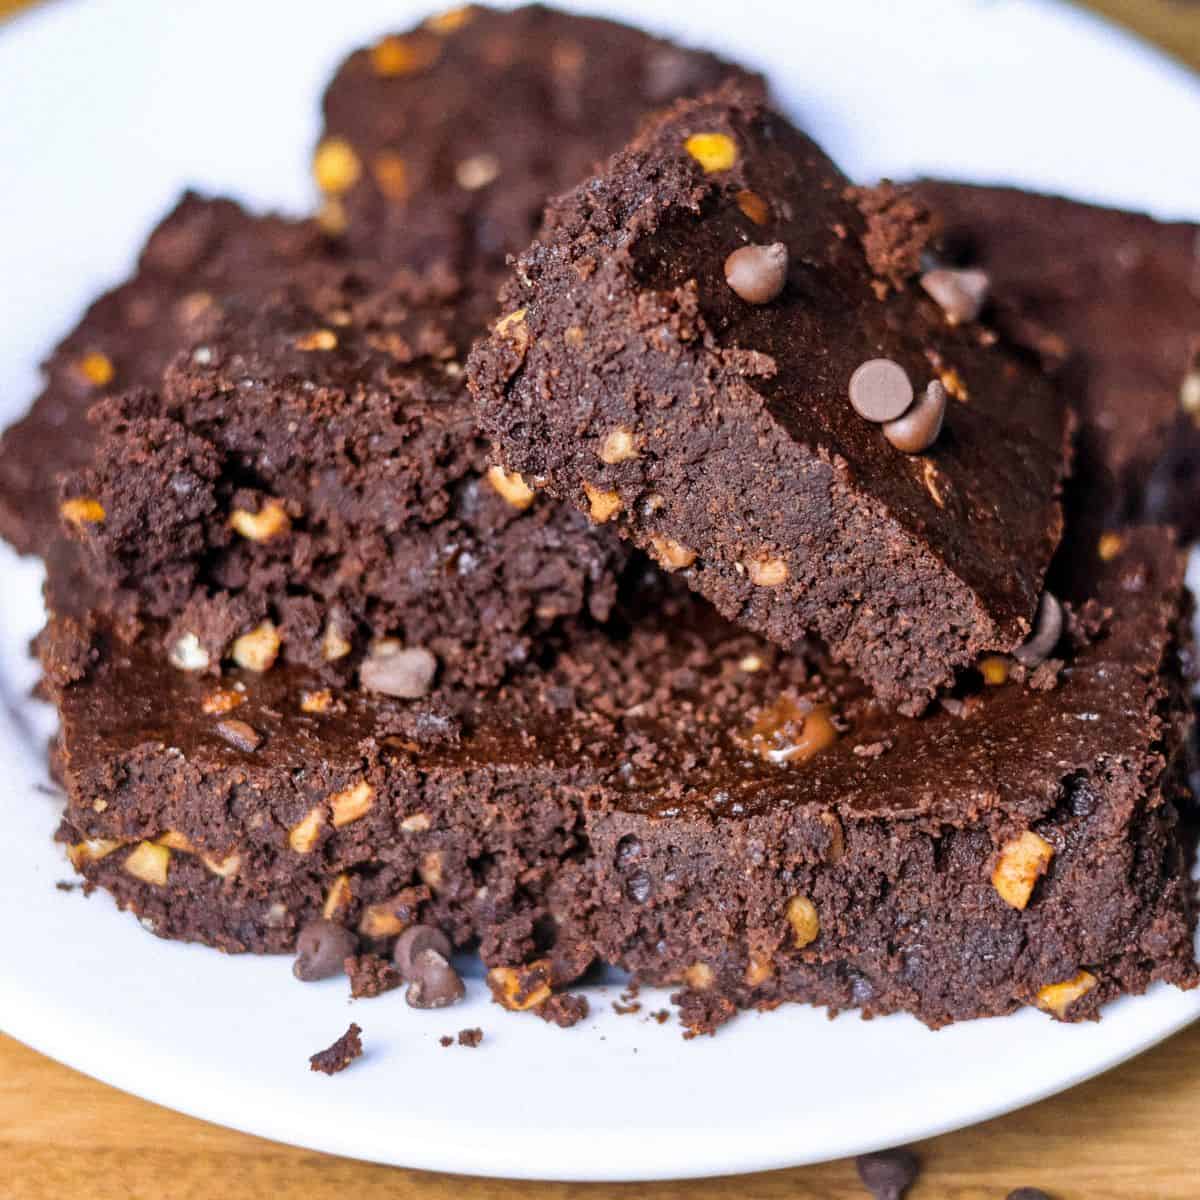 A close-up of a pile of dairy-free gluten-free brownies, showcasing the moist, fudgy texture with nu